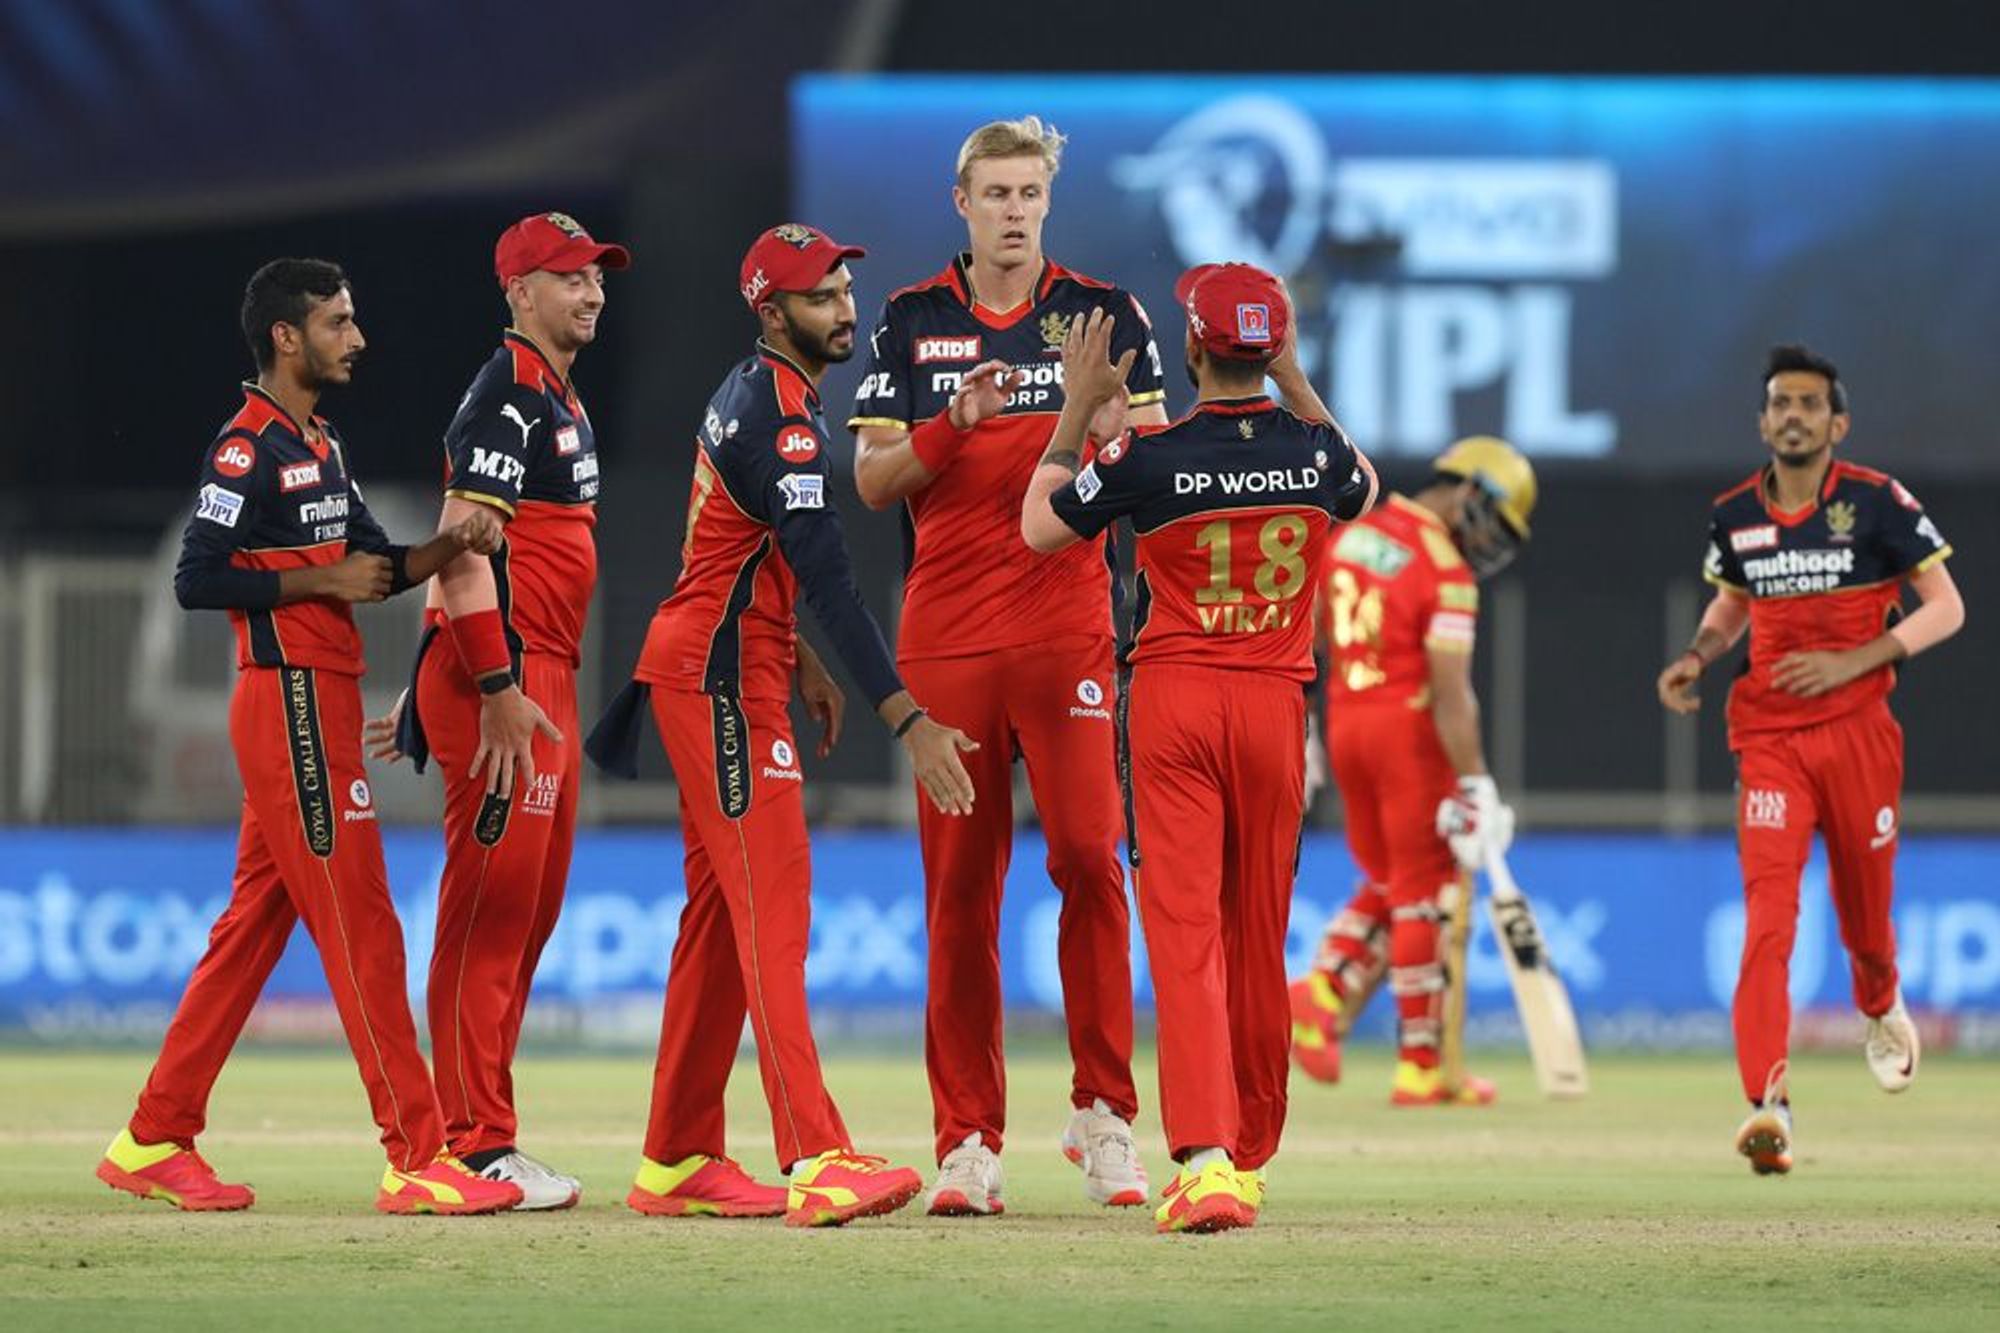 RCB needs to look at Kyle Jamieson and Mohammad Siraj for death overs | BCCI/IPL